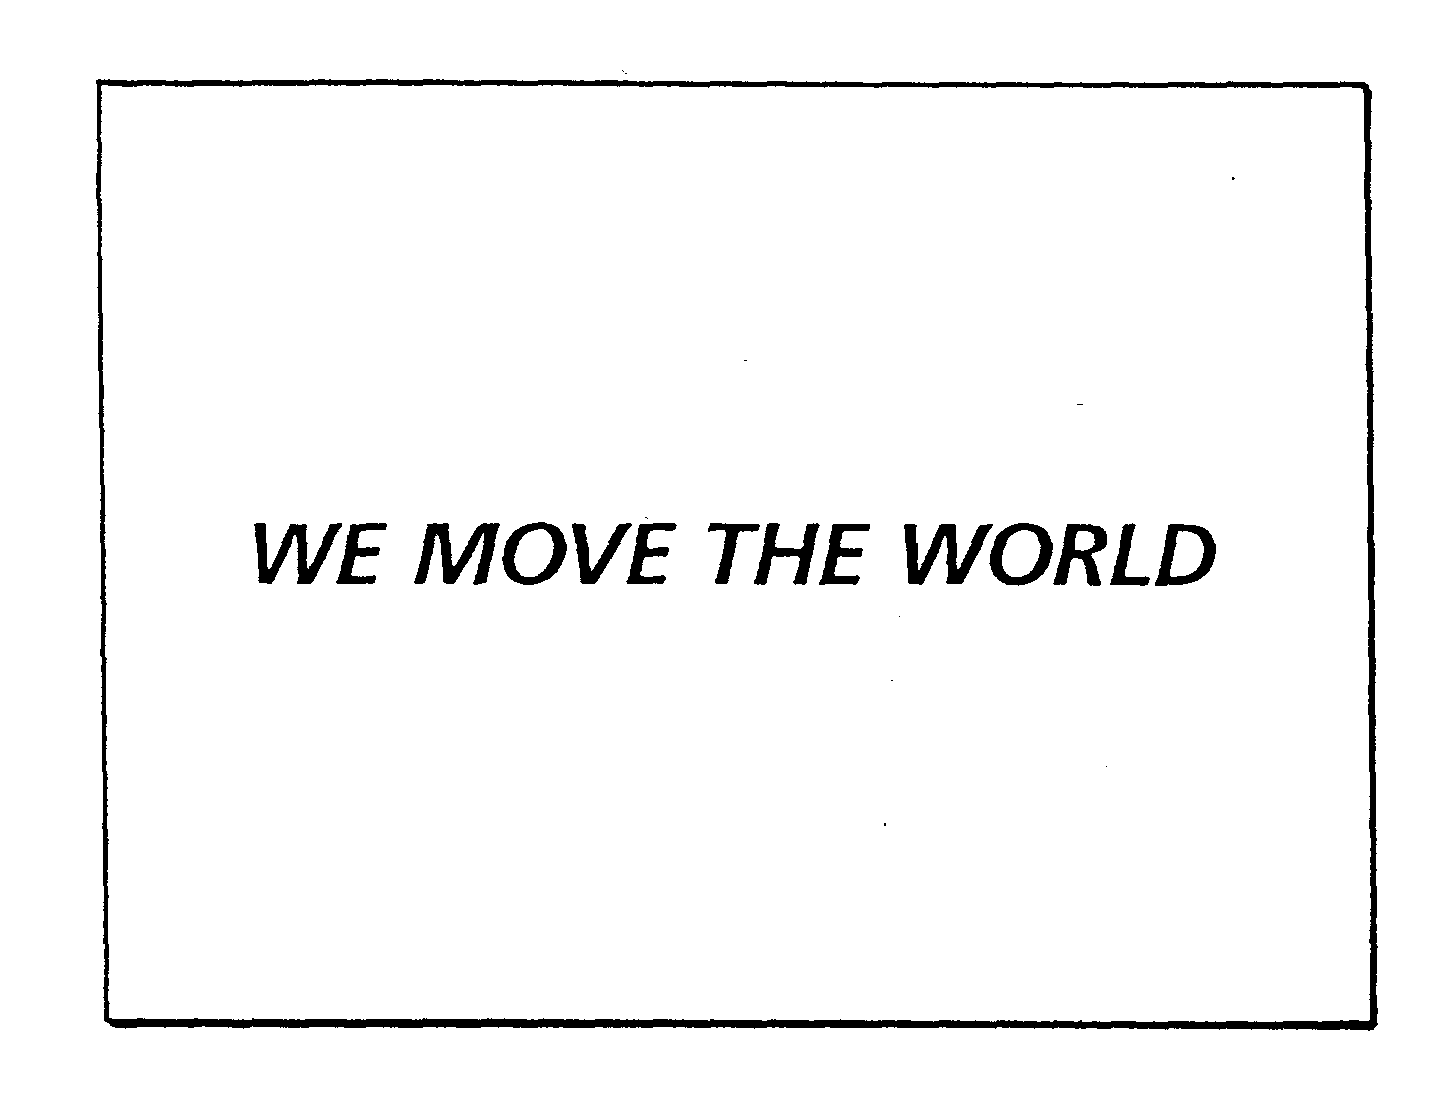  WE MOVE THE WORLD